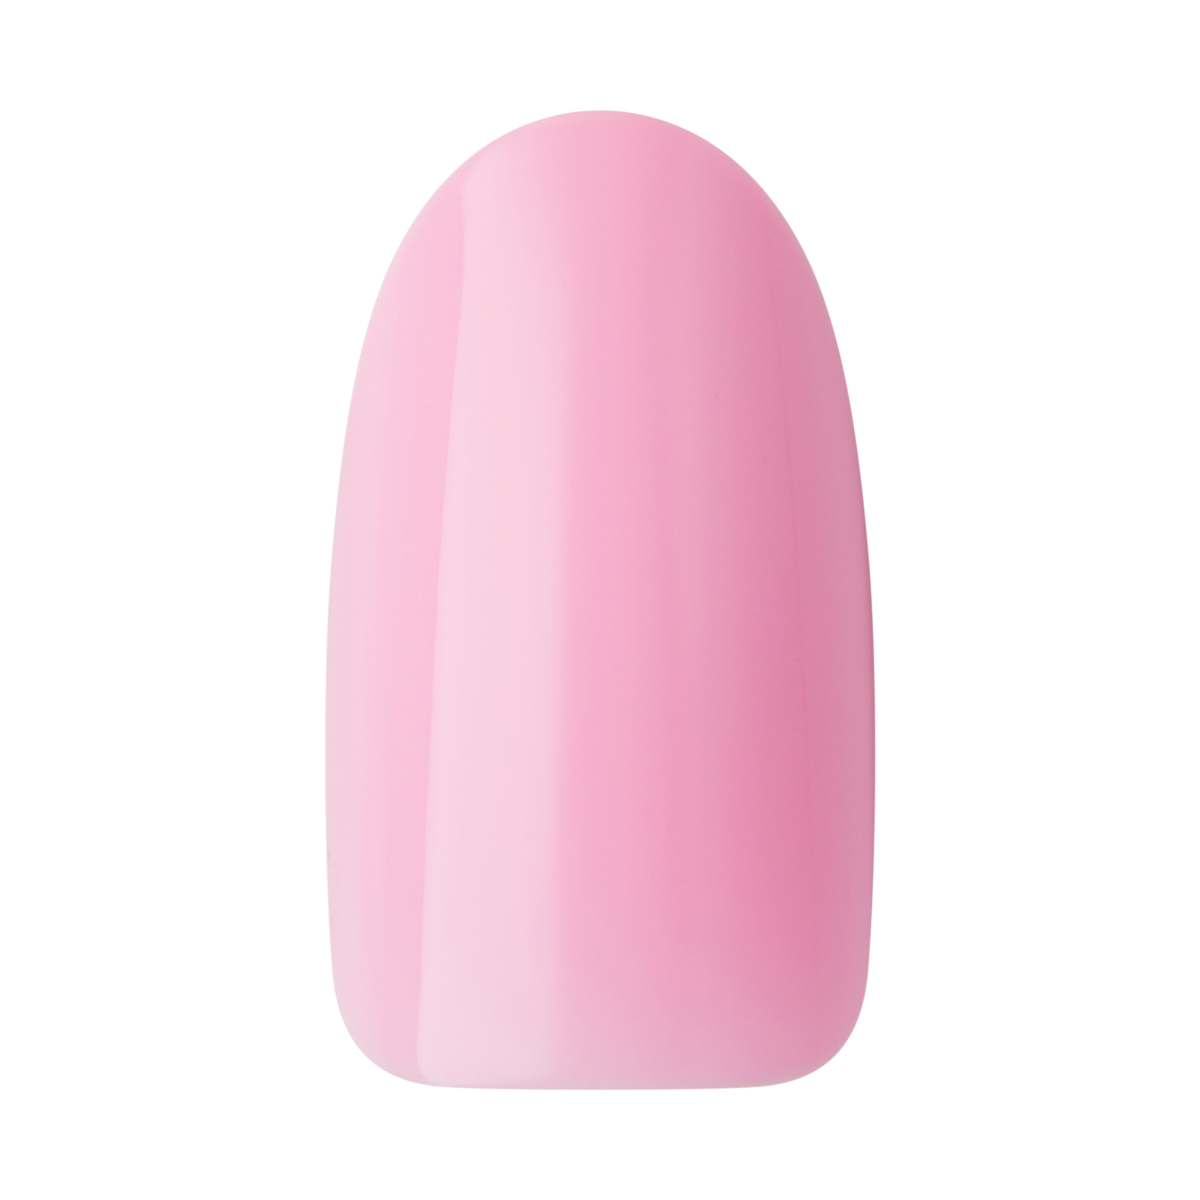 KISS Gel Sculpted, Press-On Nails, Waffles, Pink, Med Oval, 28ct